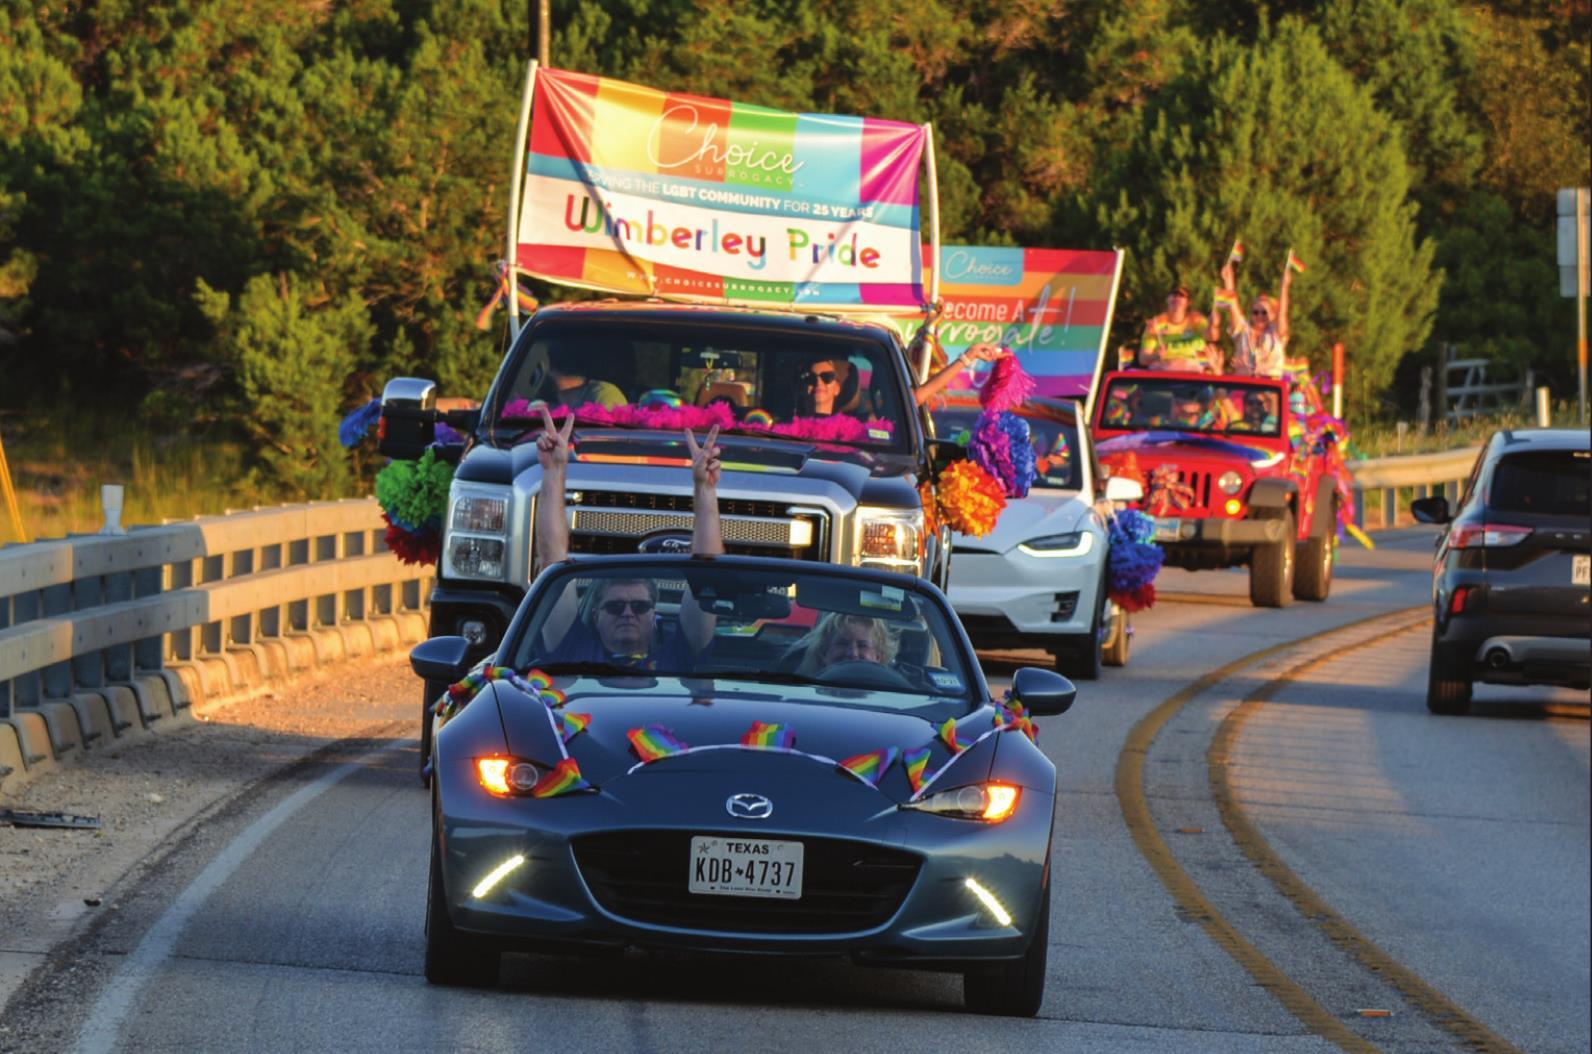 Wimberley Pride celebrates with parade Wimberley View